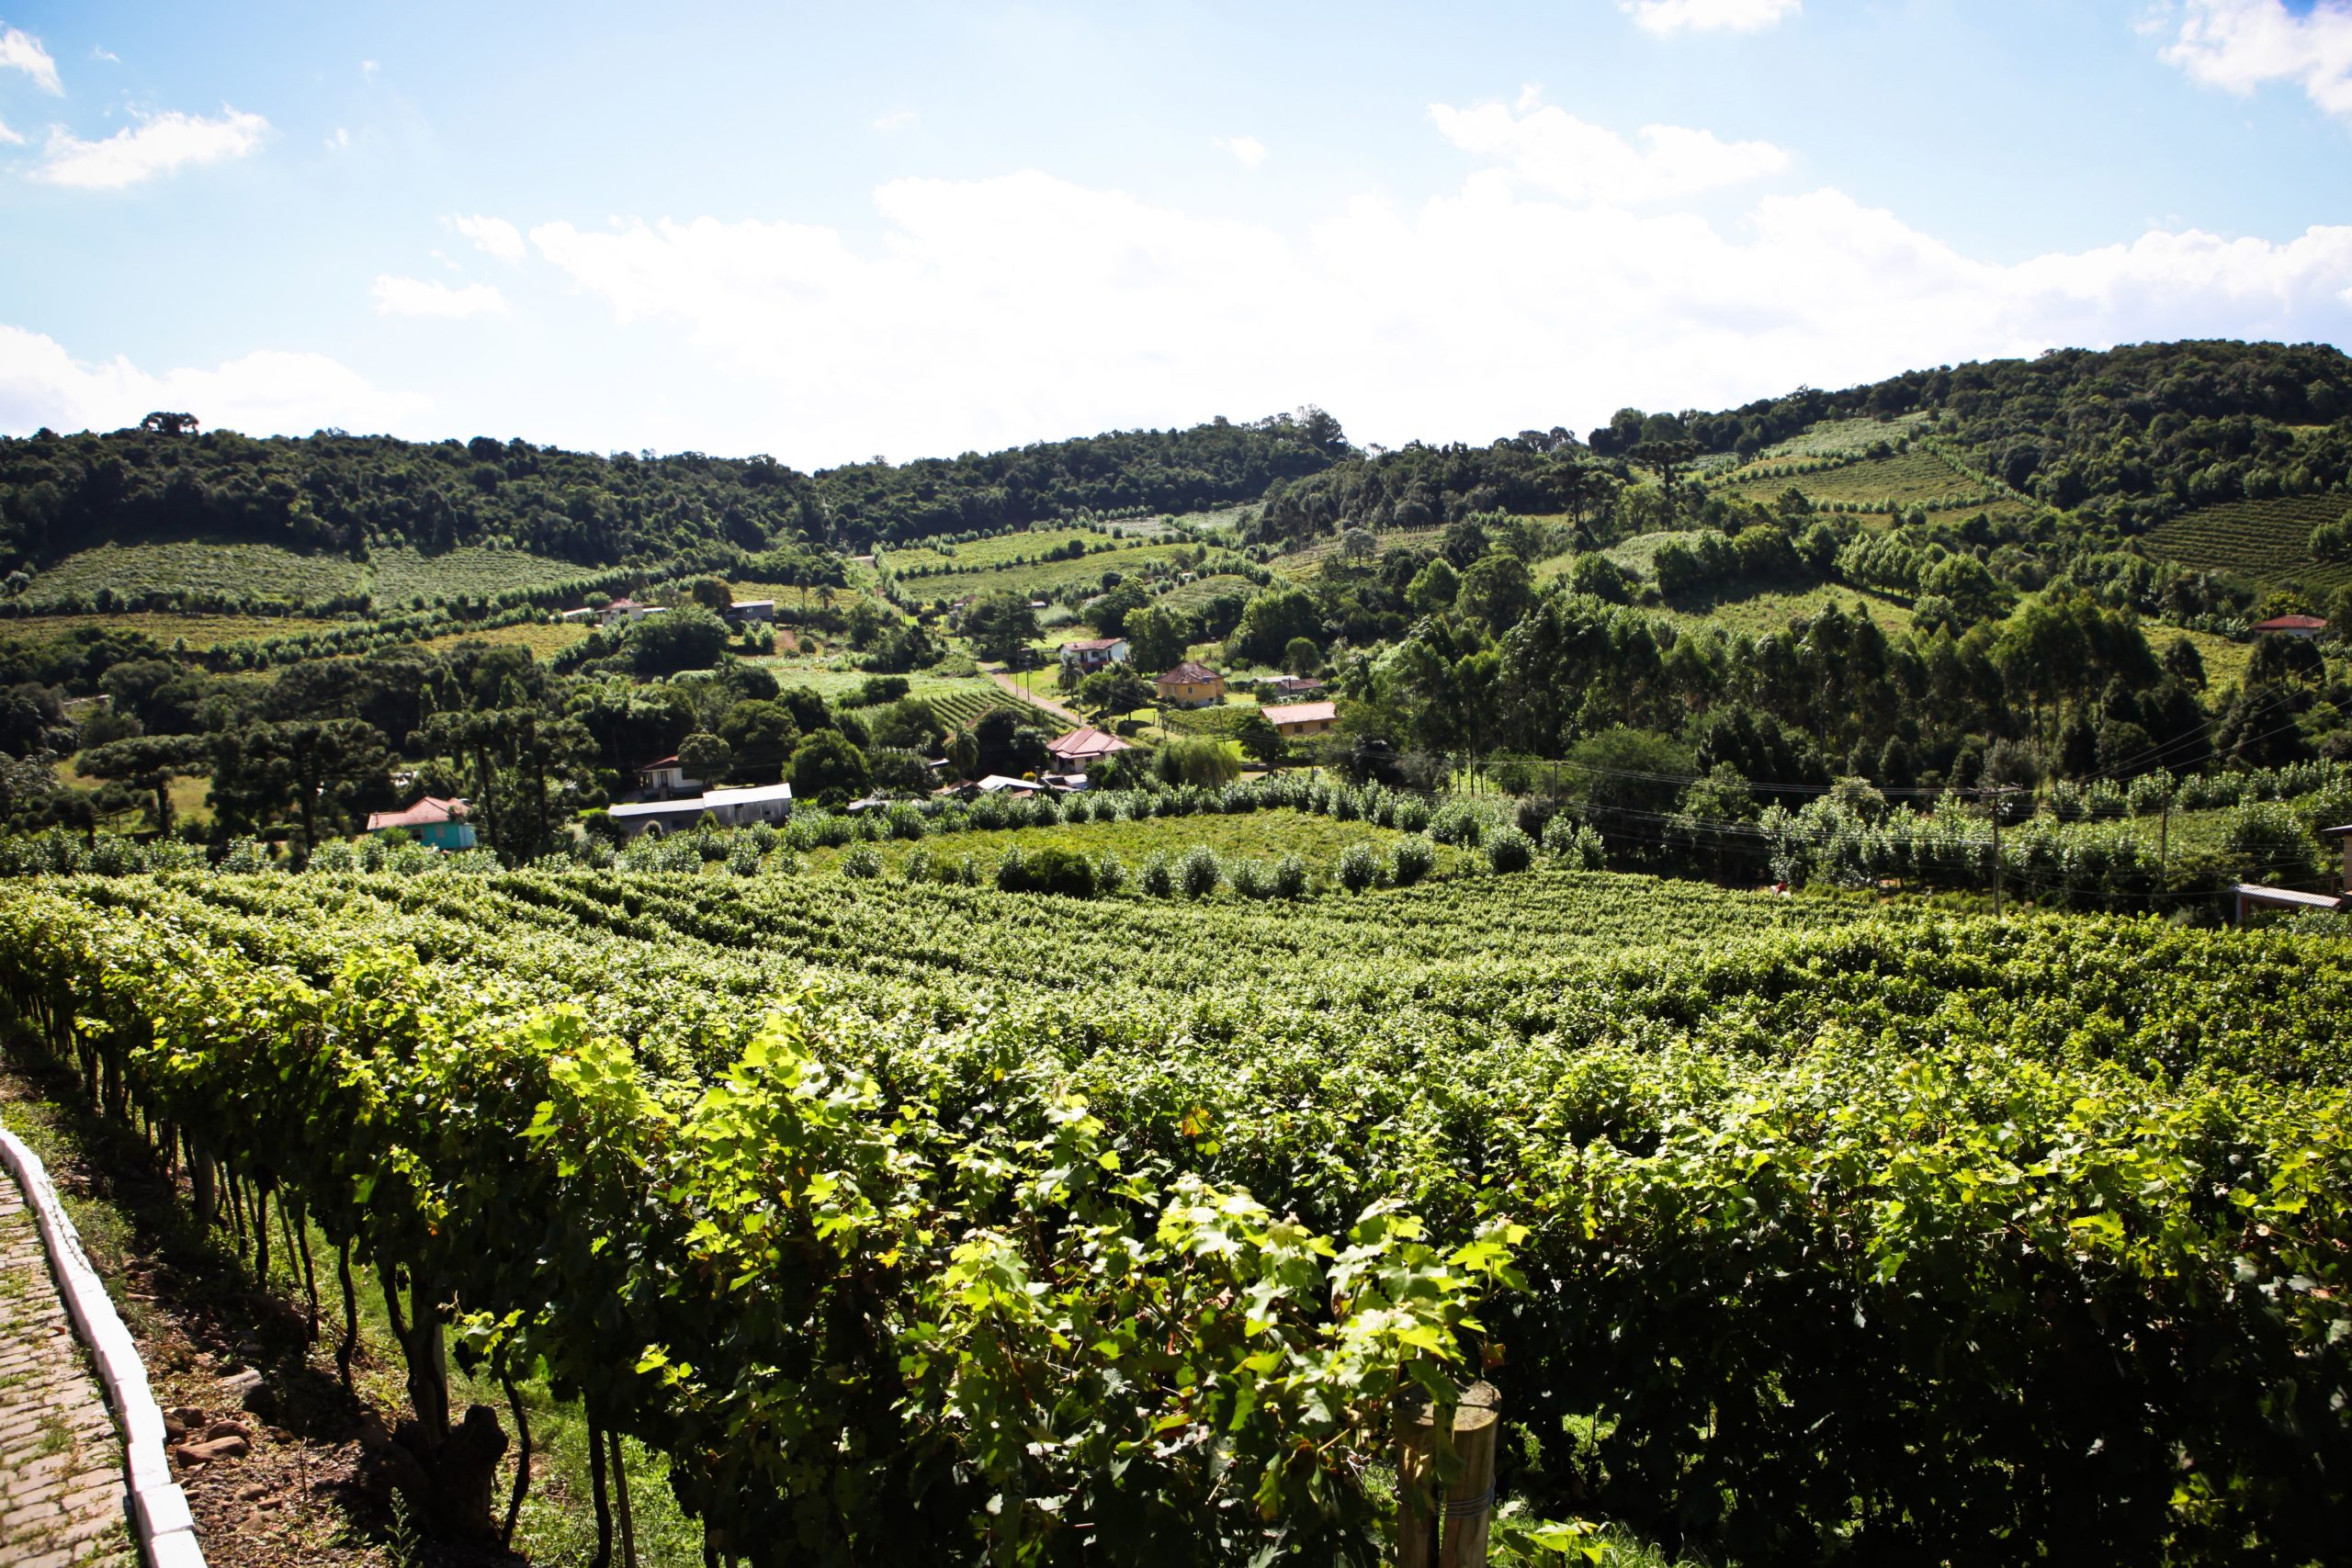 Aurora winery: Guide to Brazil's wines & wineries